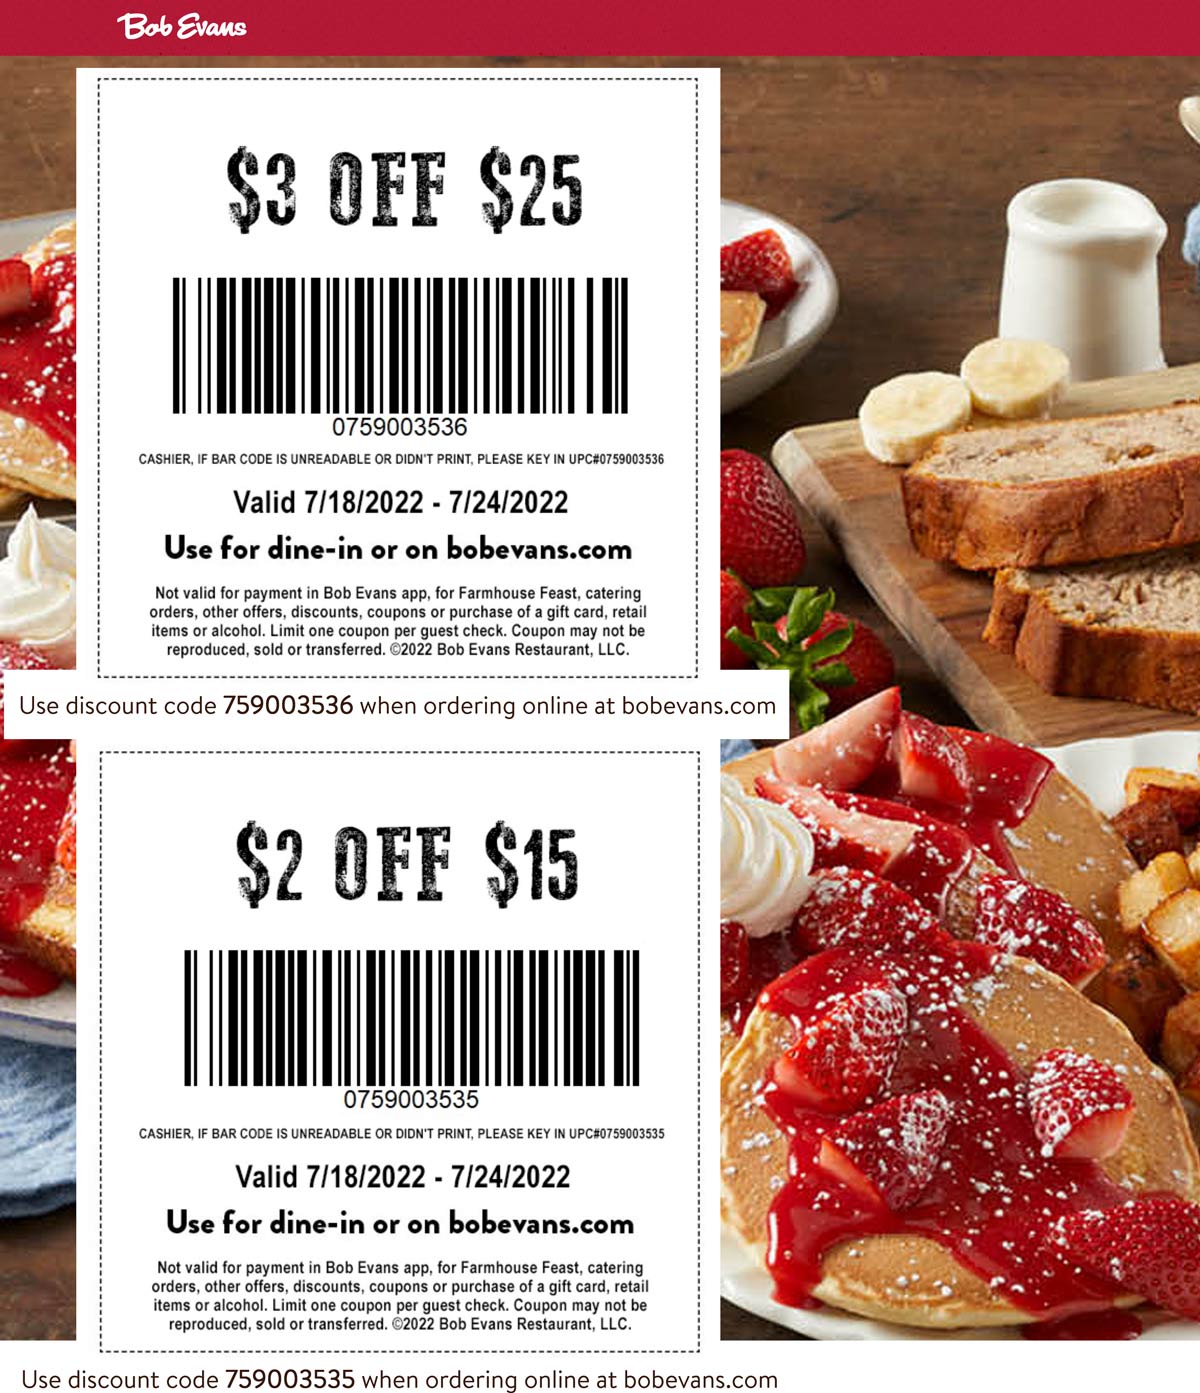 Bob Evans coupons & promo code for [December 2022]